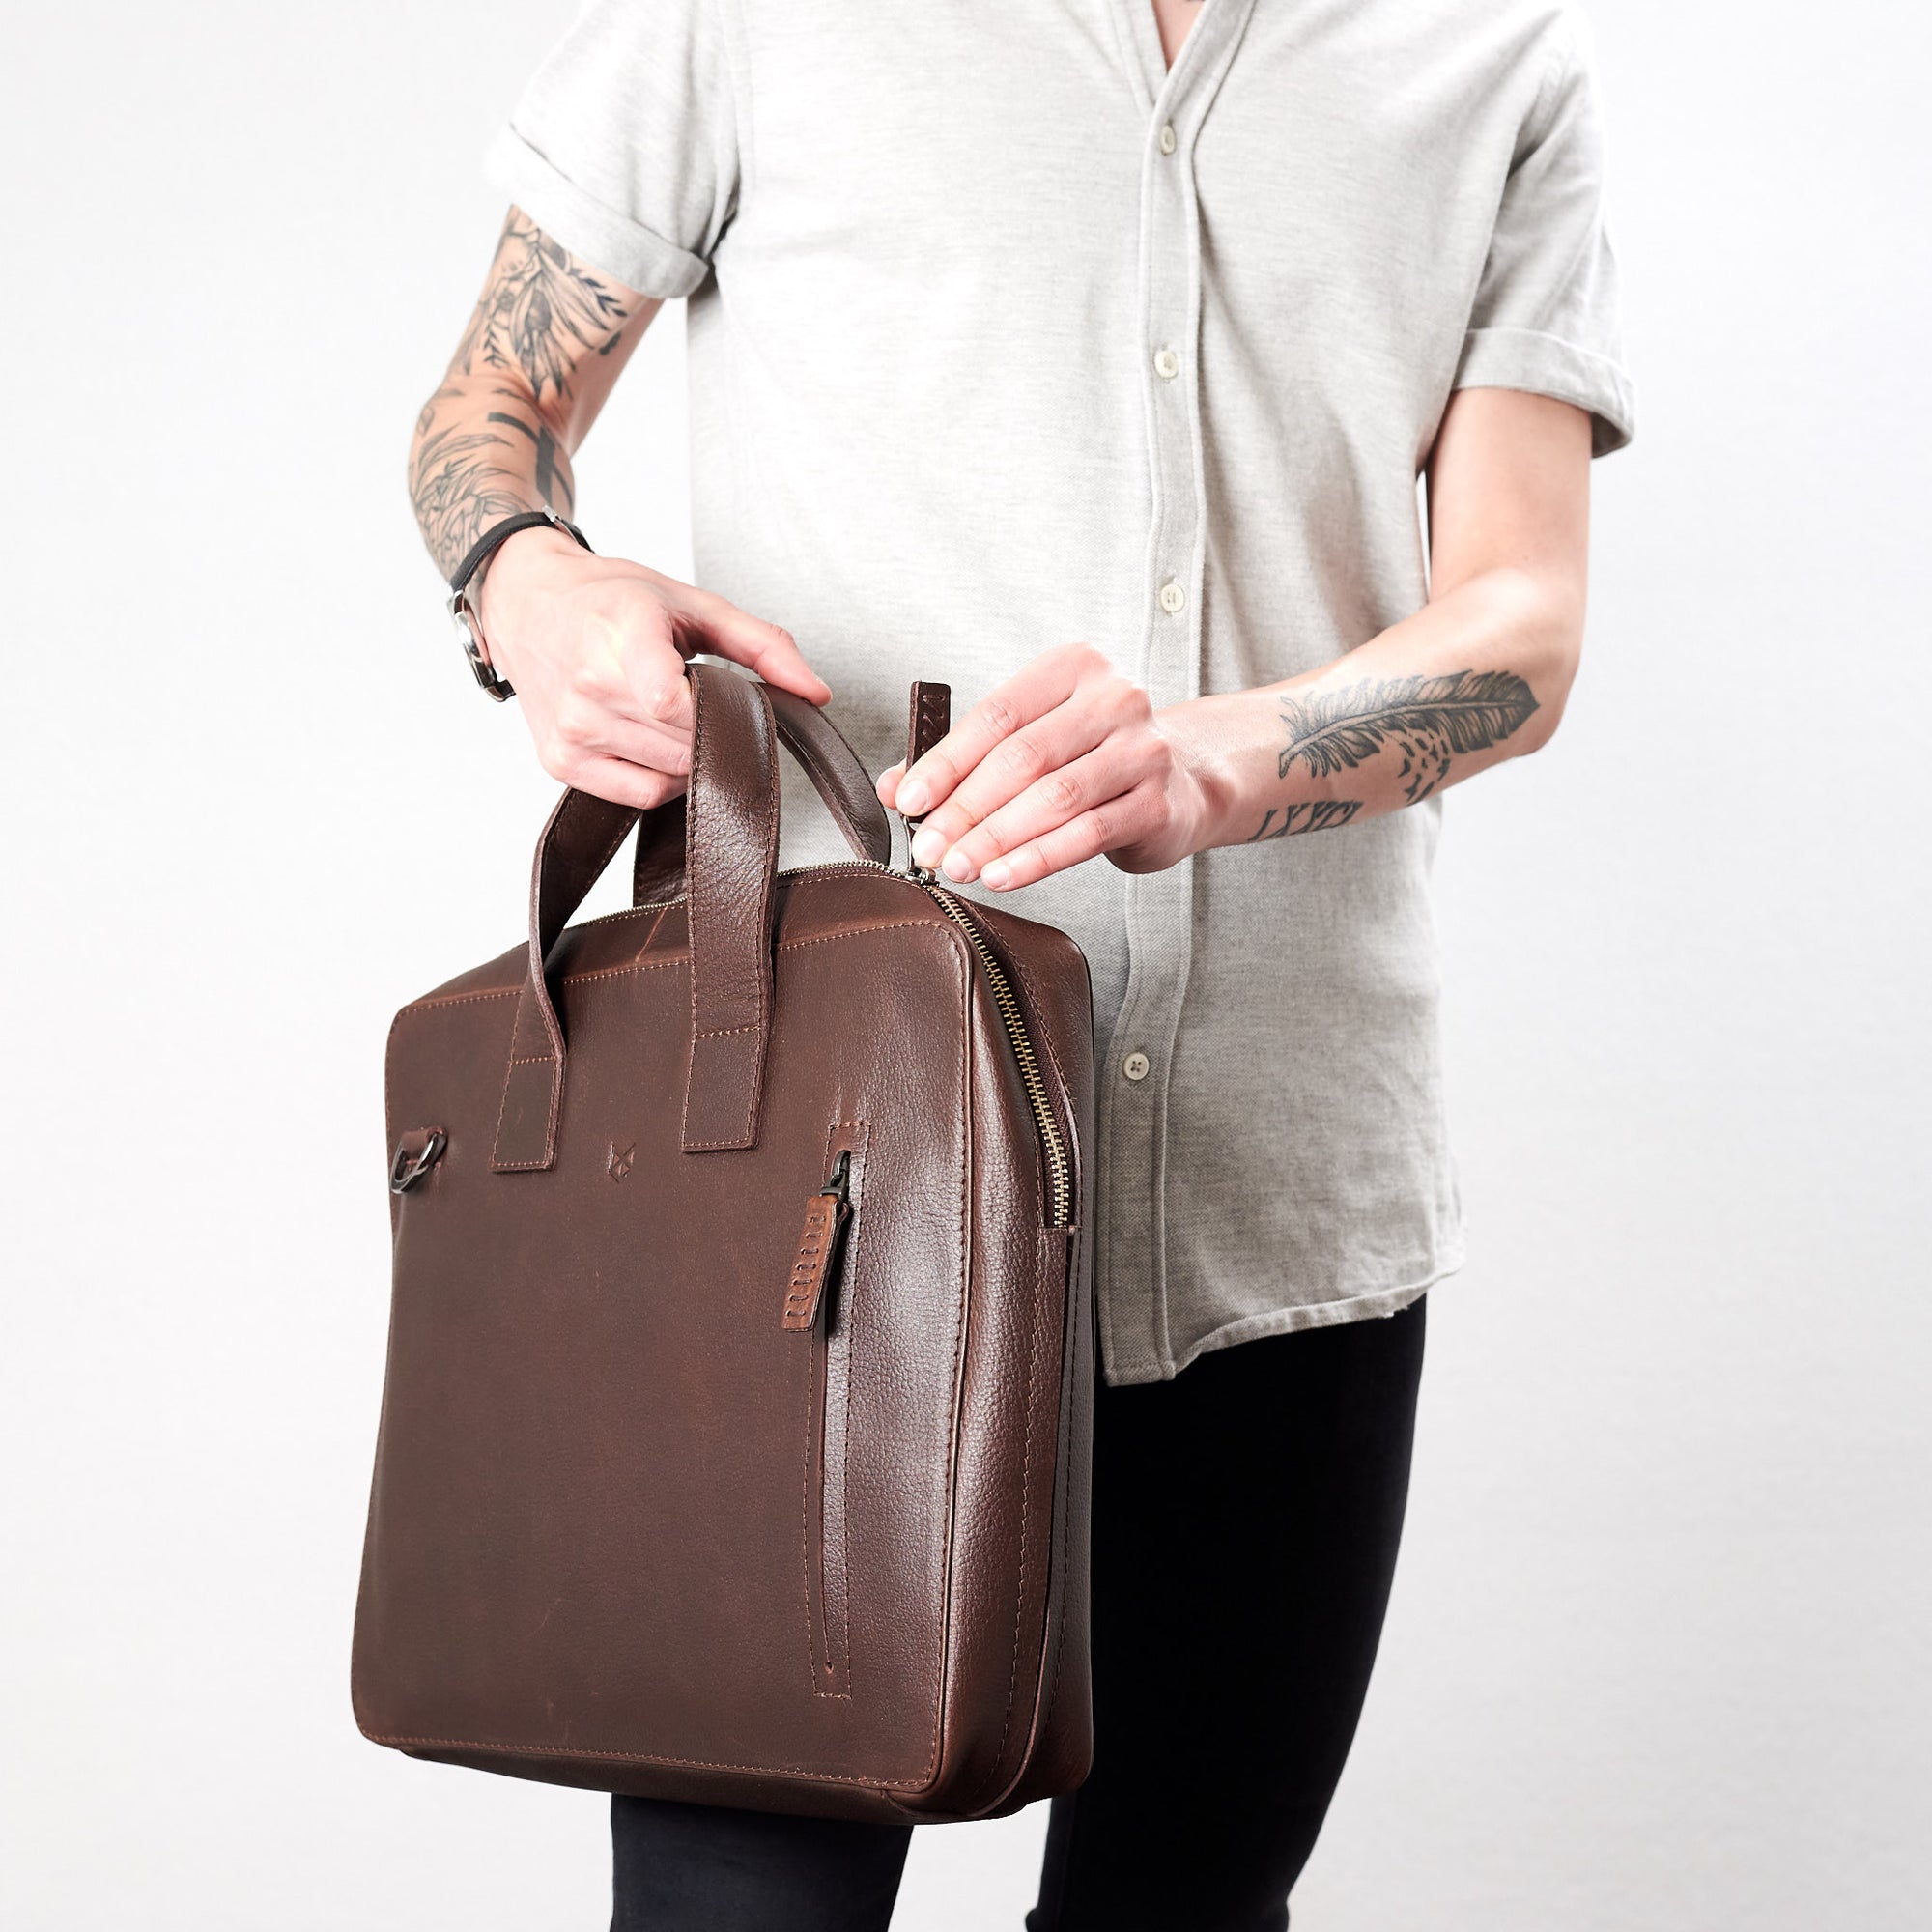 Roko briefcase in dark brown. Handles holding detail. Style picture by Capra Leather.